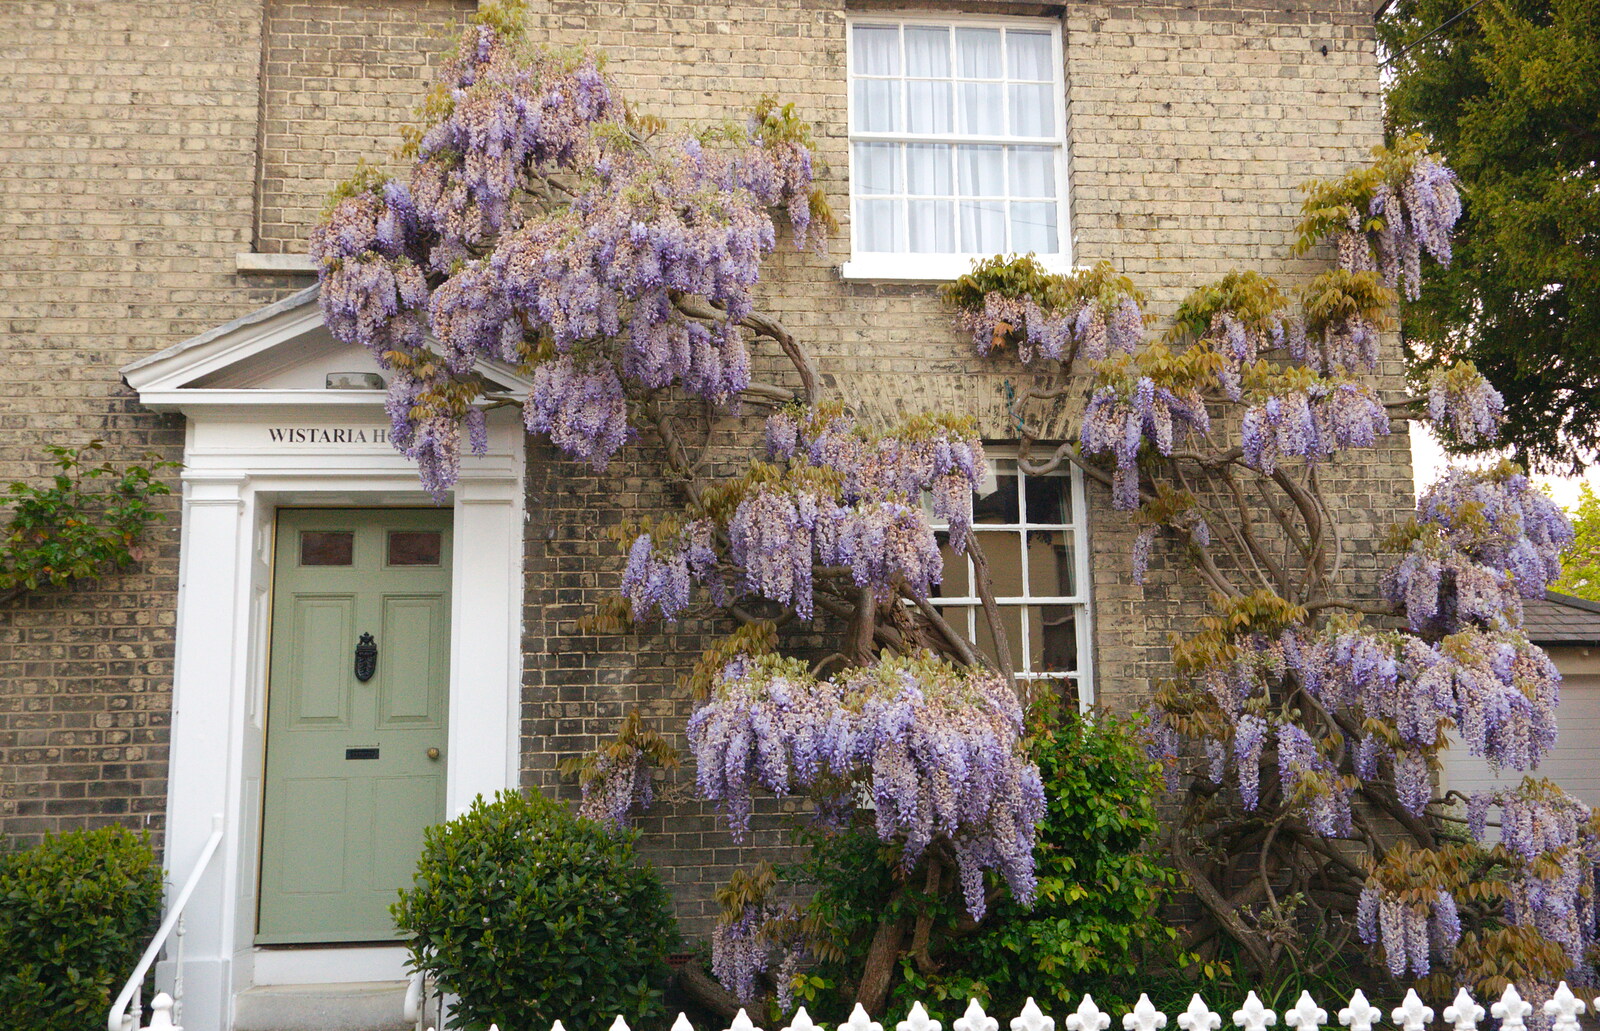 An epic Wisteria, on the oddly-named Wistaria House from The BSCC Bike Ride 2019, Coggeshall, Essex - 11th May 2019